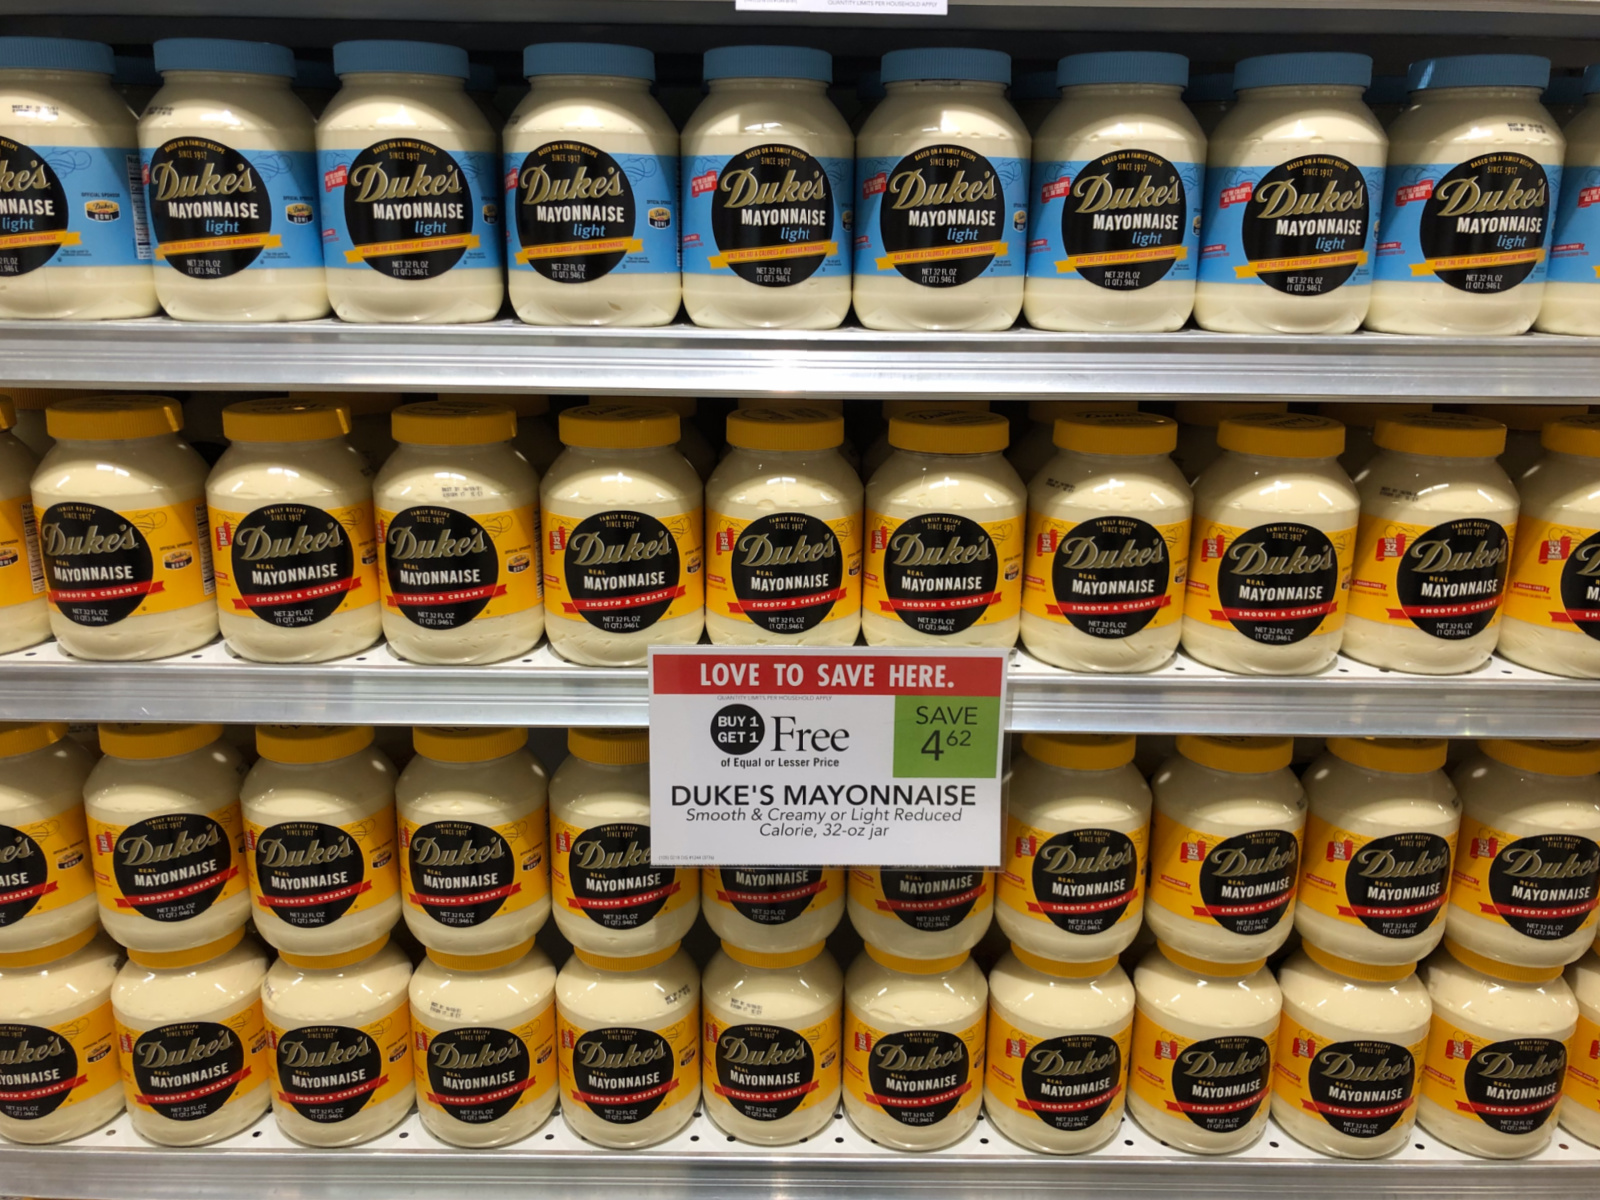 Get That One Of A Kind Taste Of Duke's Mayonnaise & Save At Publix - Buy One, Get One FREE! on I Heart Publix 1